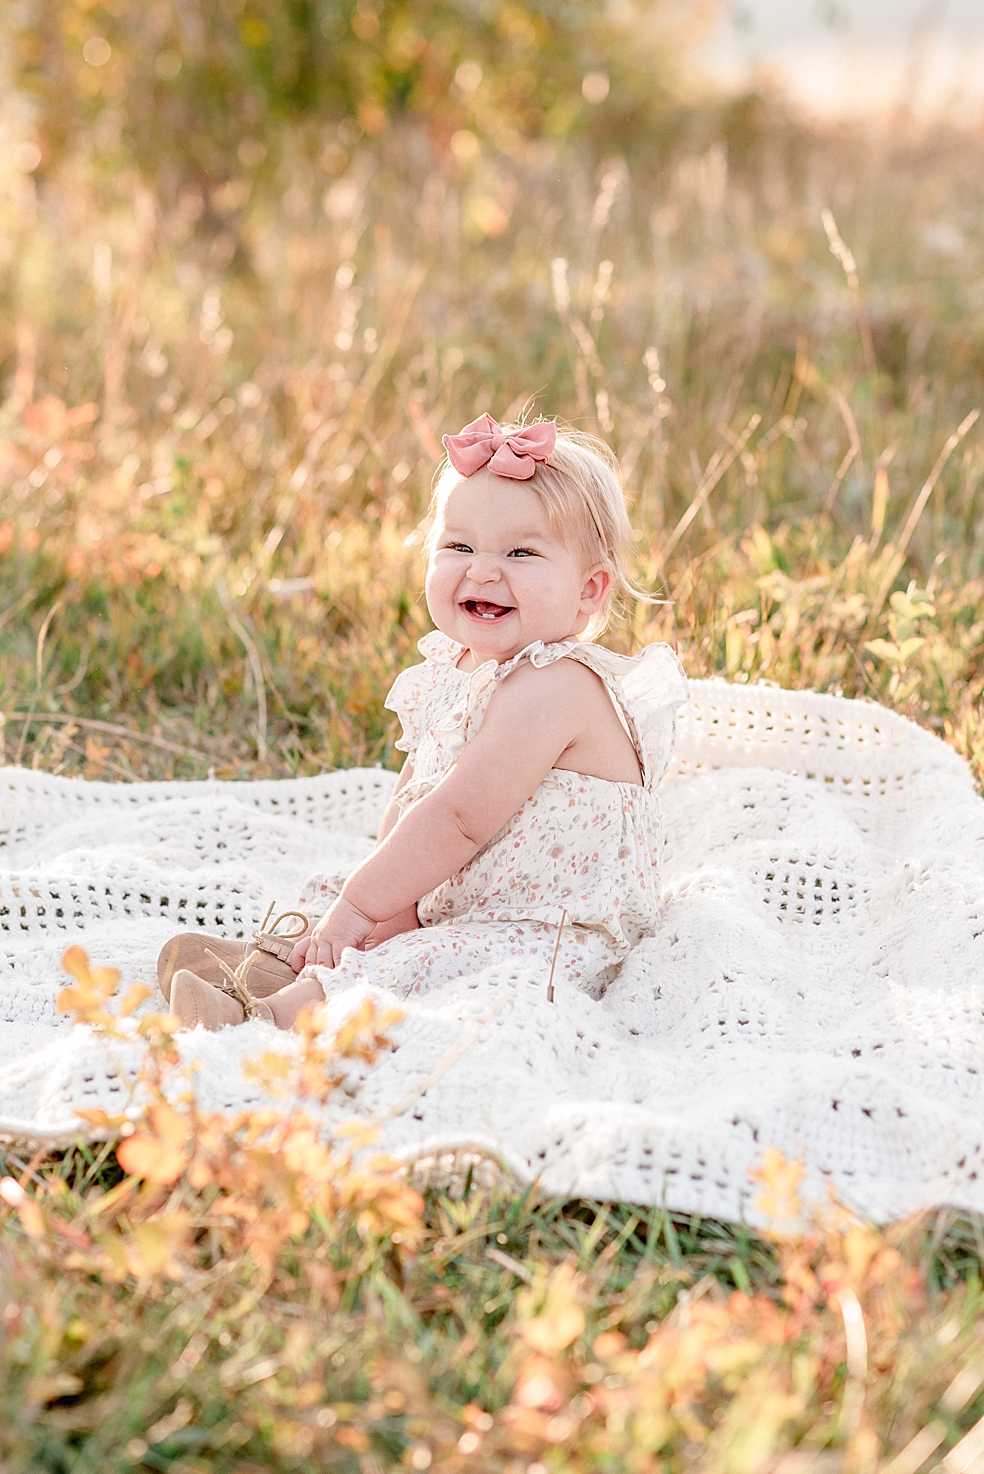 Toddler baby girl scrunching nose and smiling | Photo by Jessica Lee Photography